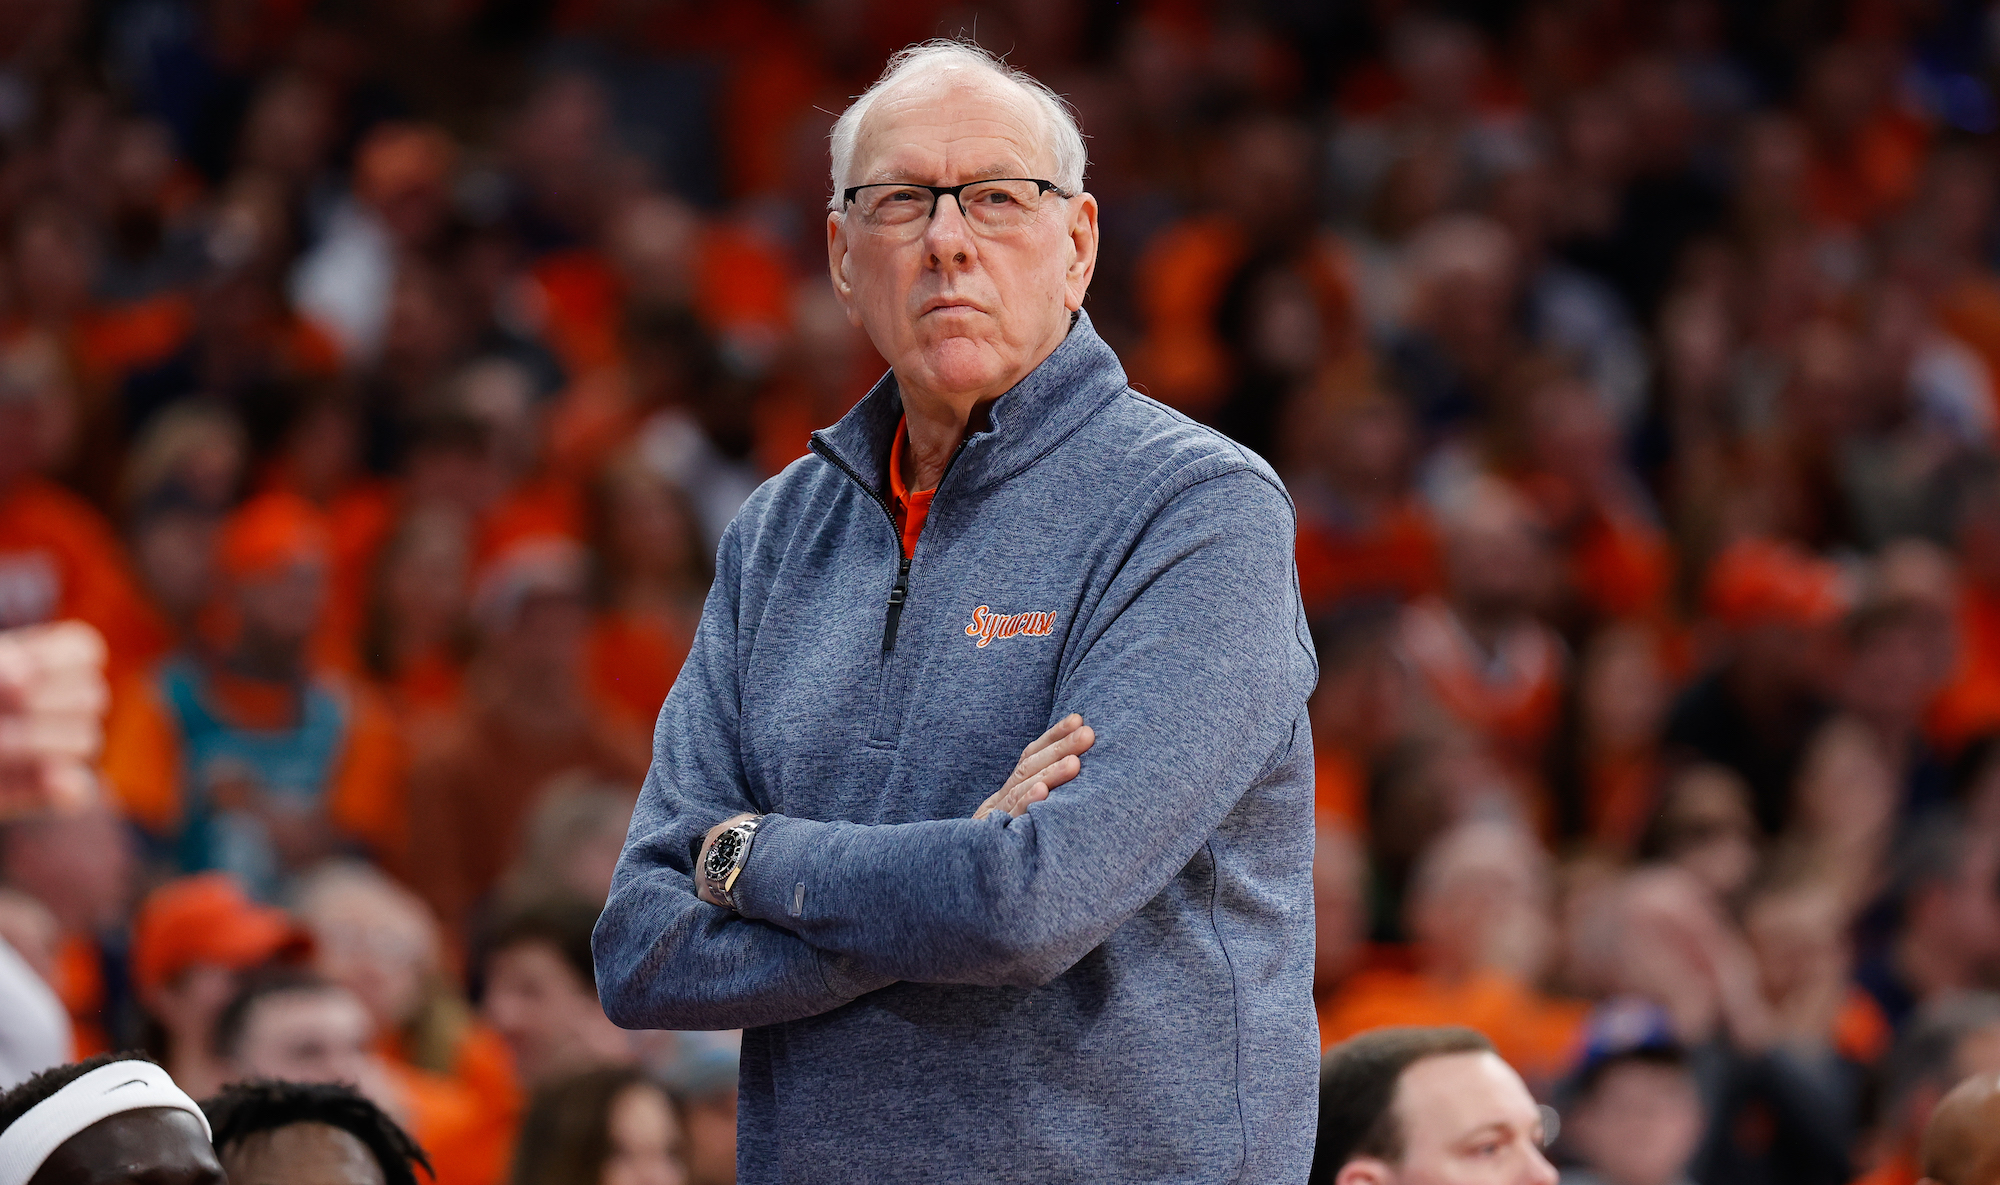 SYRACUSE, NY - FEBRUARY 18: Head coach Jim Boeheim of the Syracuse Orange looks on during the second half against the Duke Blue Devils at JMA Wireless Dome on February 18, 2023 in Syracuse, New York. (Photo by Isaiah Vazquez/Getty Images)